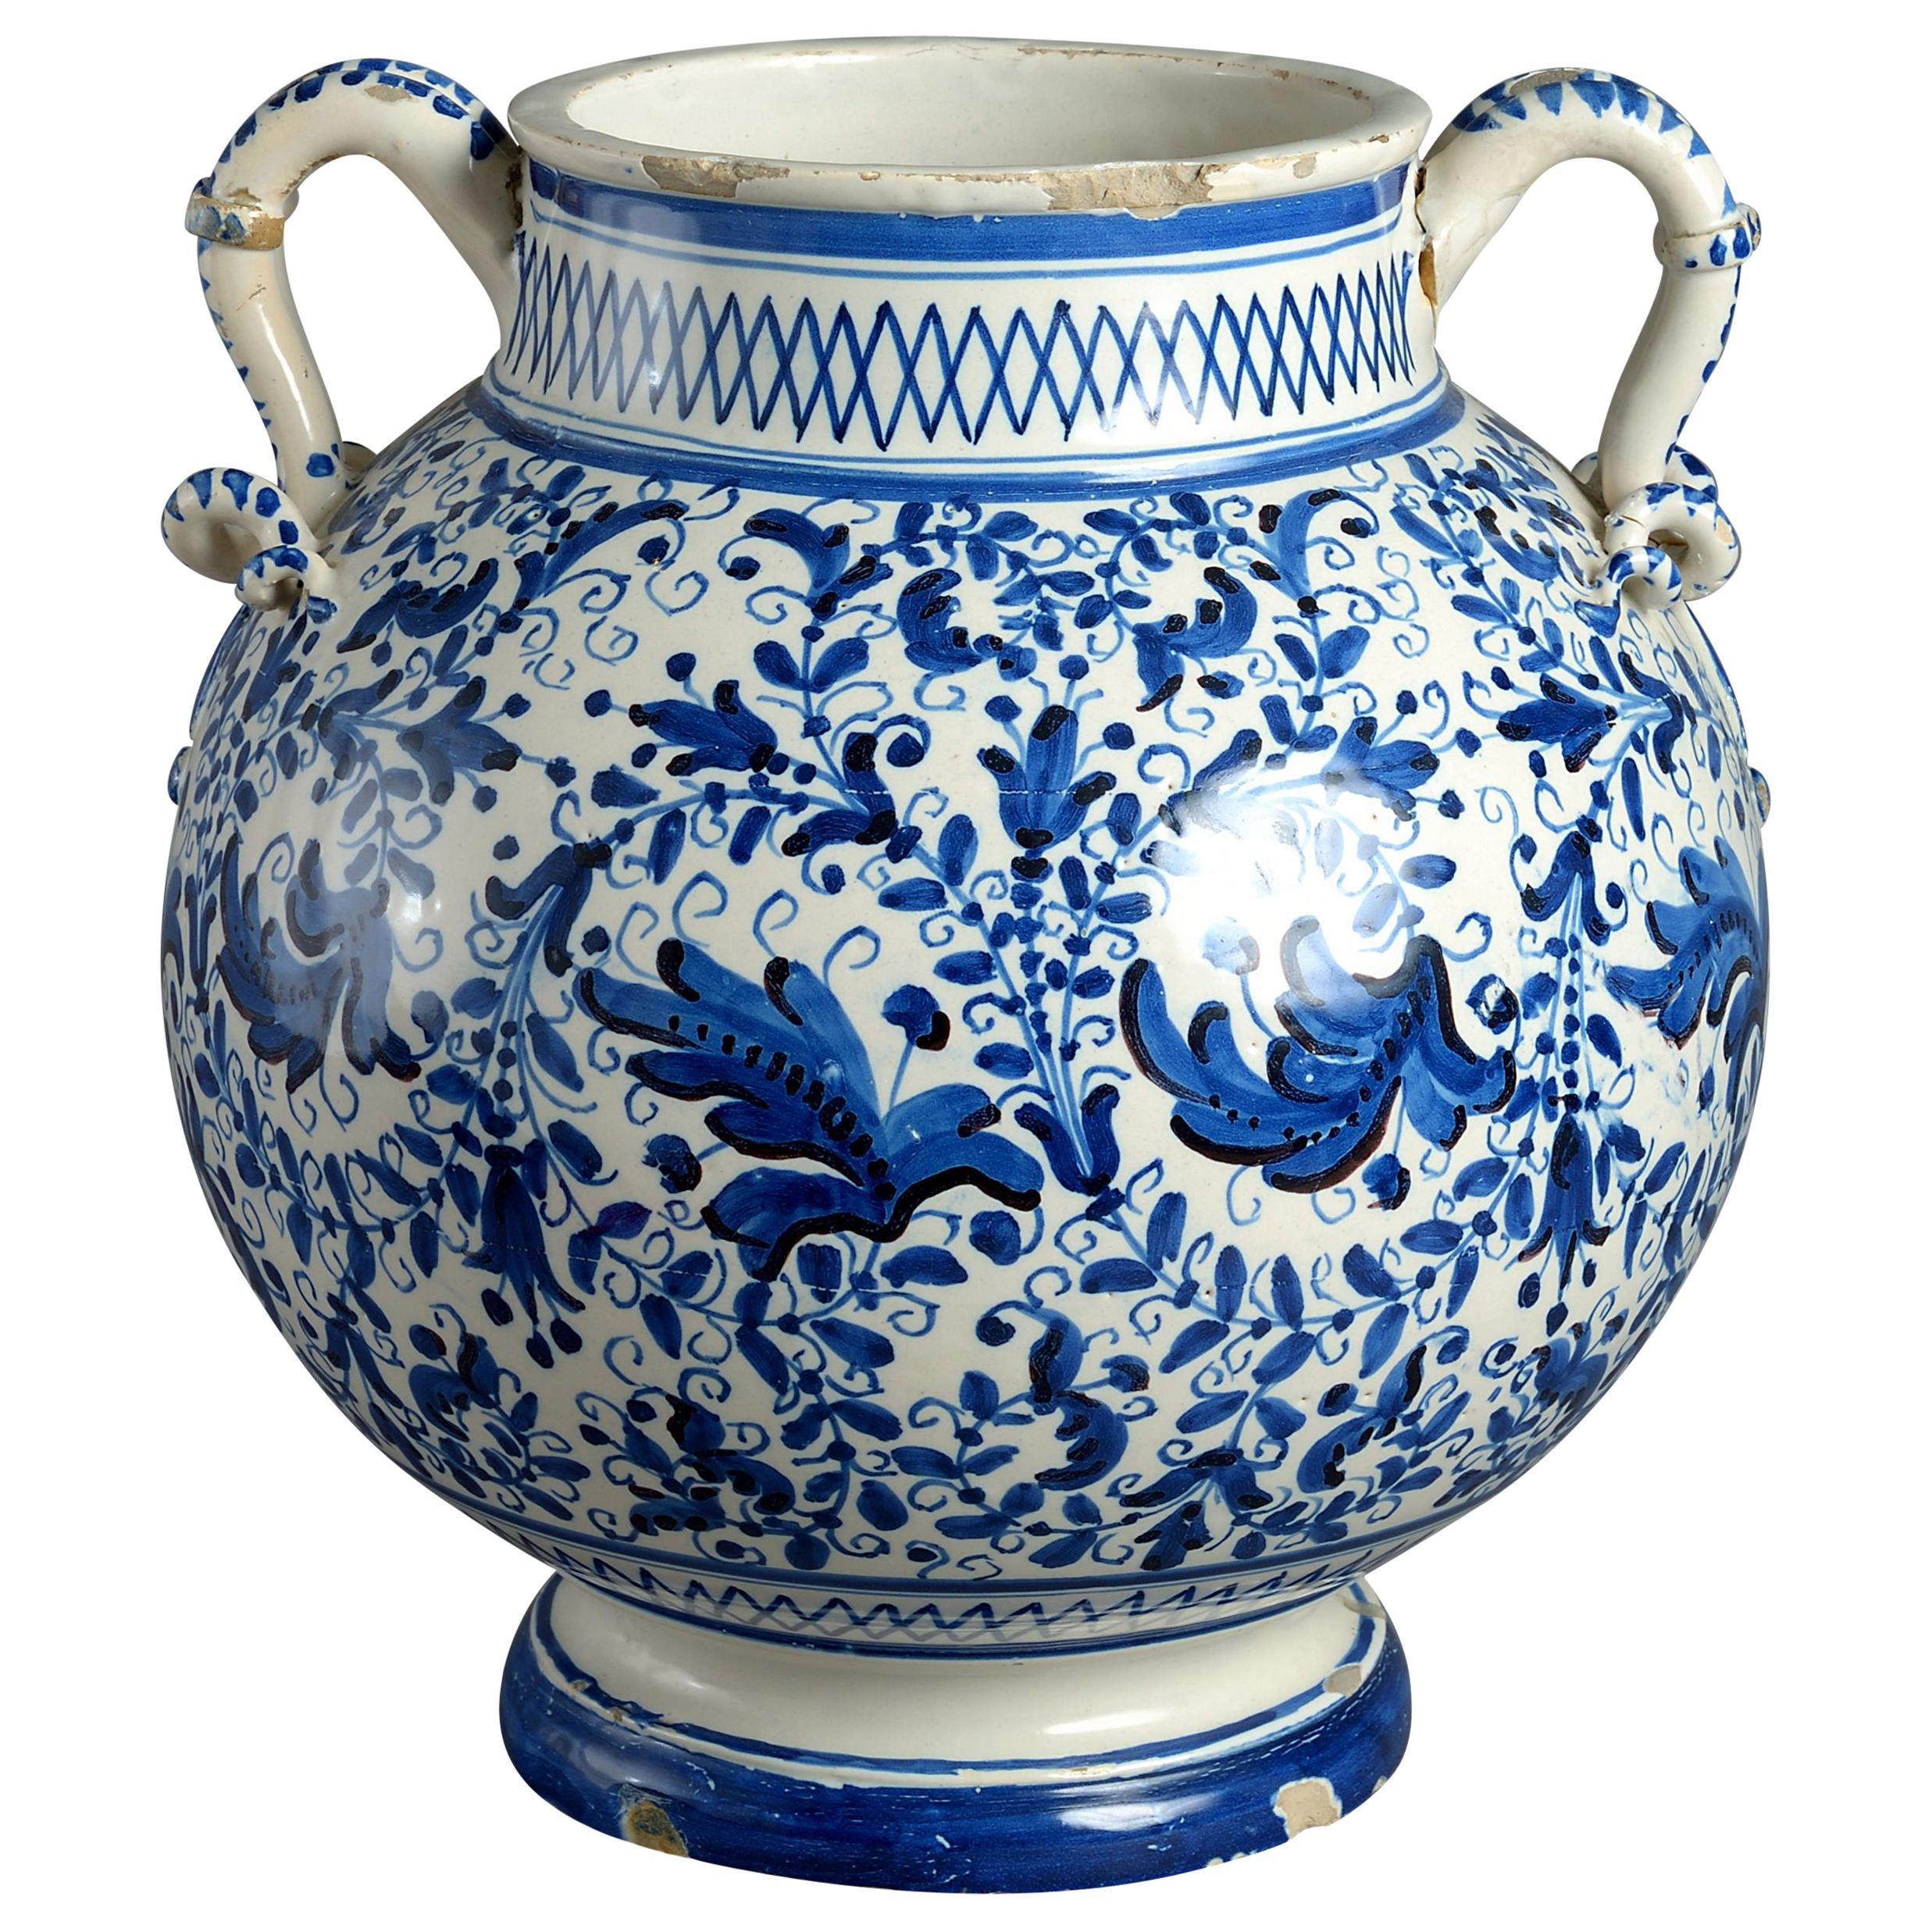 29 Lovable Wedgwood Vase Blue and White 2024 free download wedgwood vase blue and white of early 17th century blue and white kraakware charger at 1stdibs regarding 12362051 master